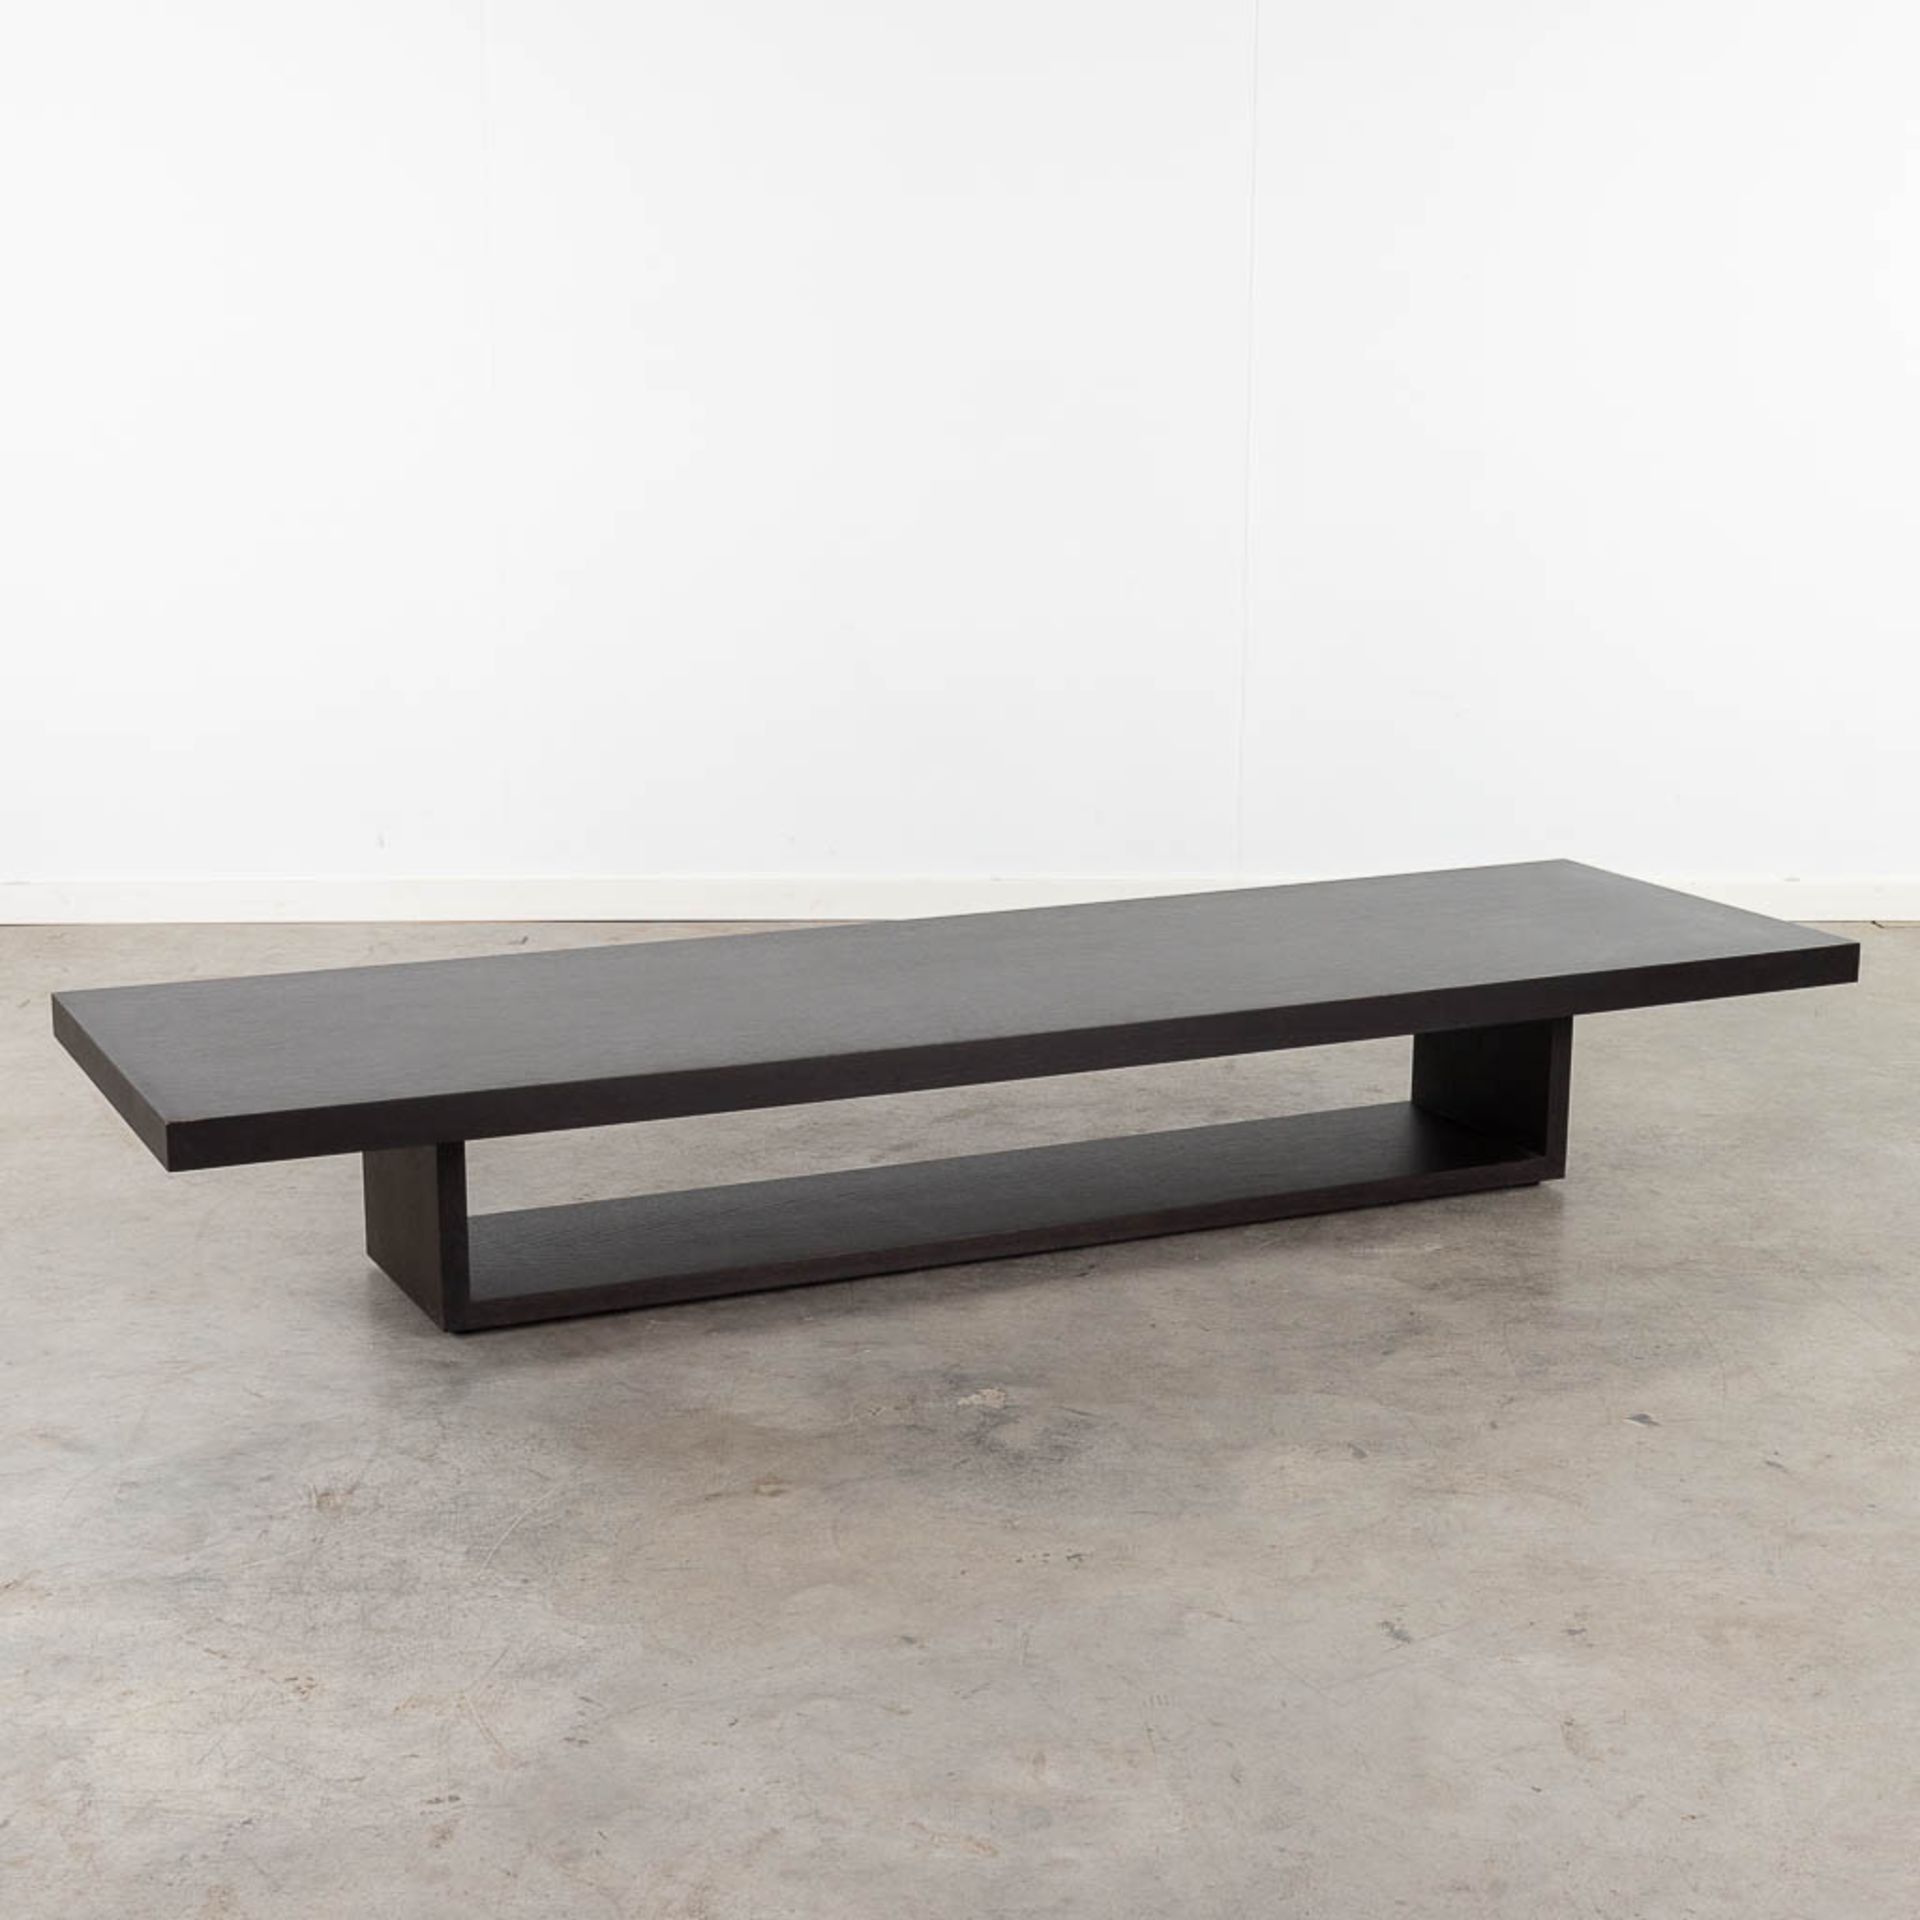 Cassina, a coffee table, ebonised wood. Not signed. (L: 200 x W: 60 x H: 30 cm)